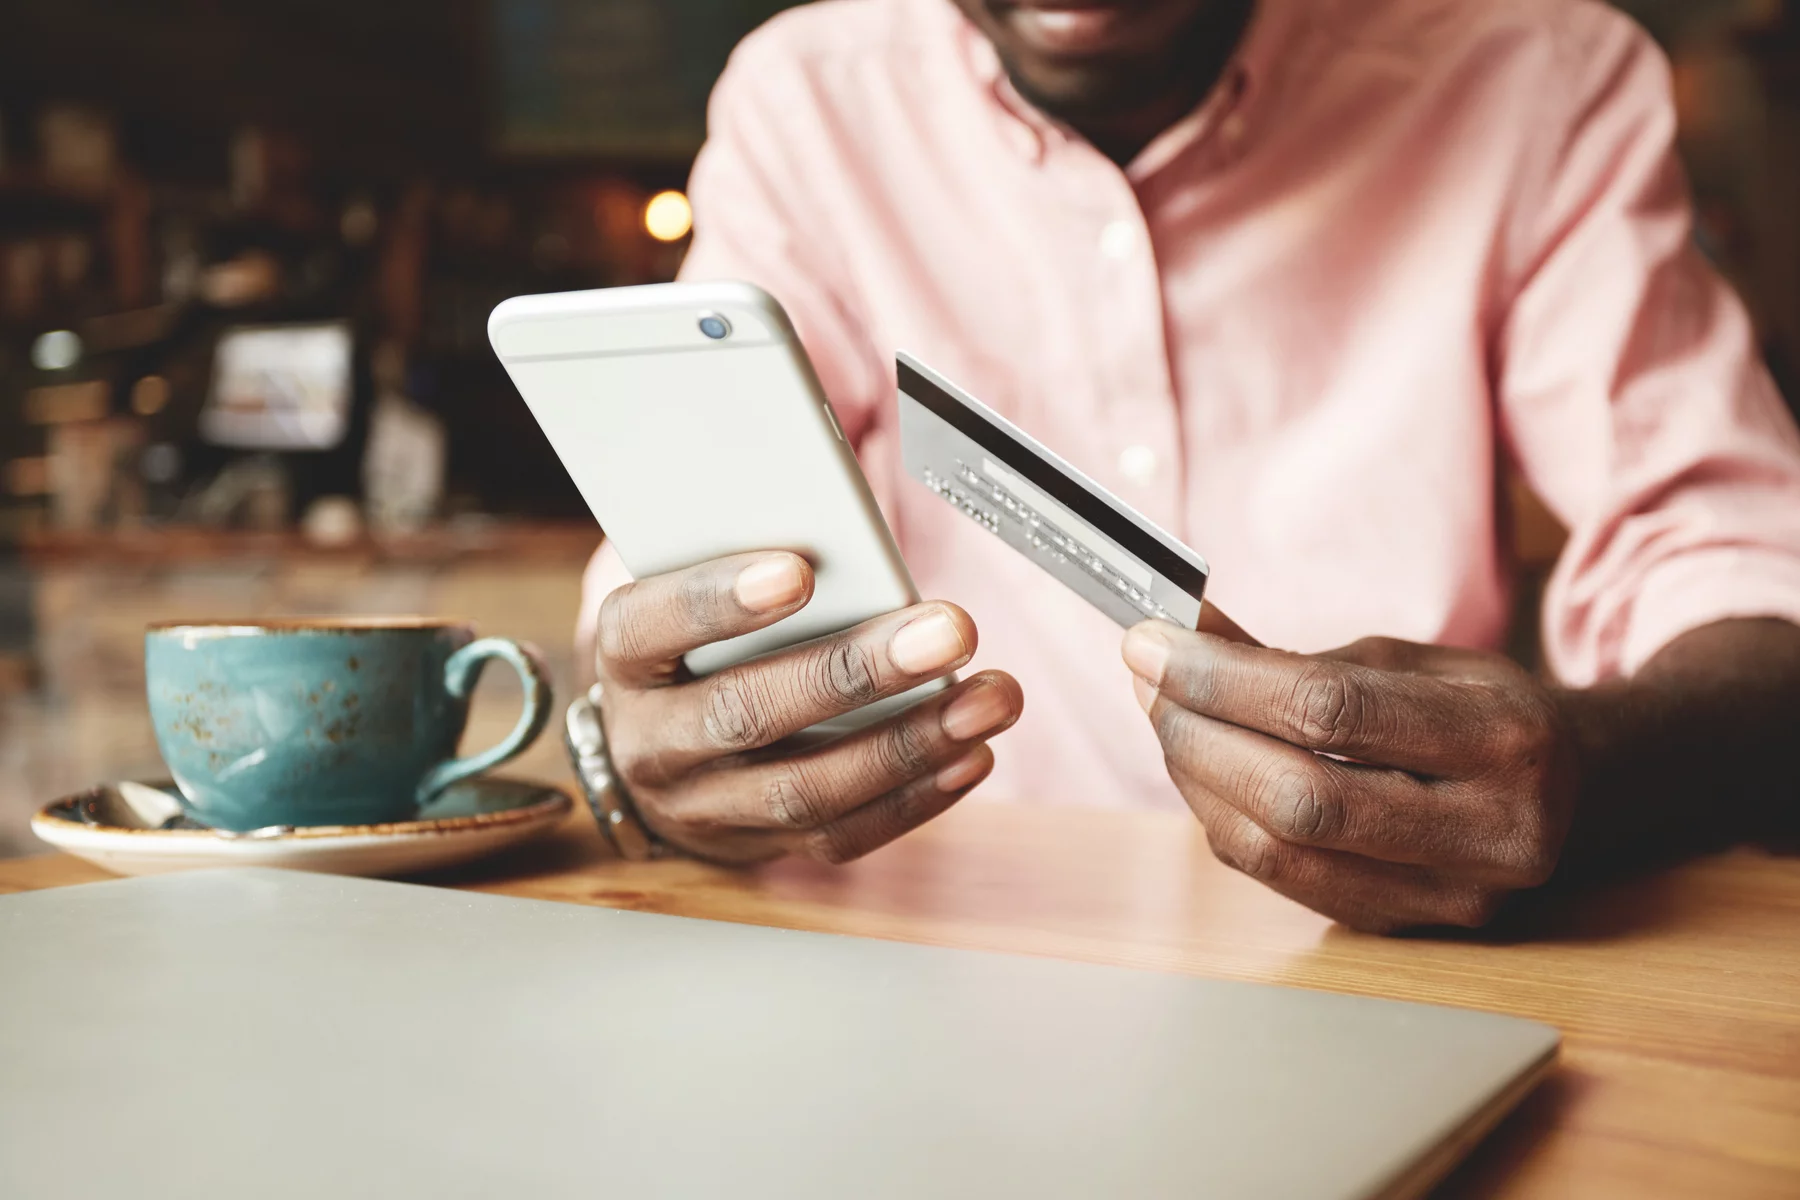 Using a credit card and mobile banking